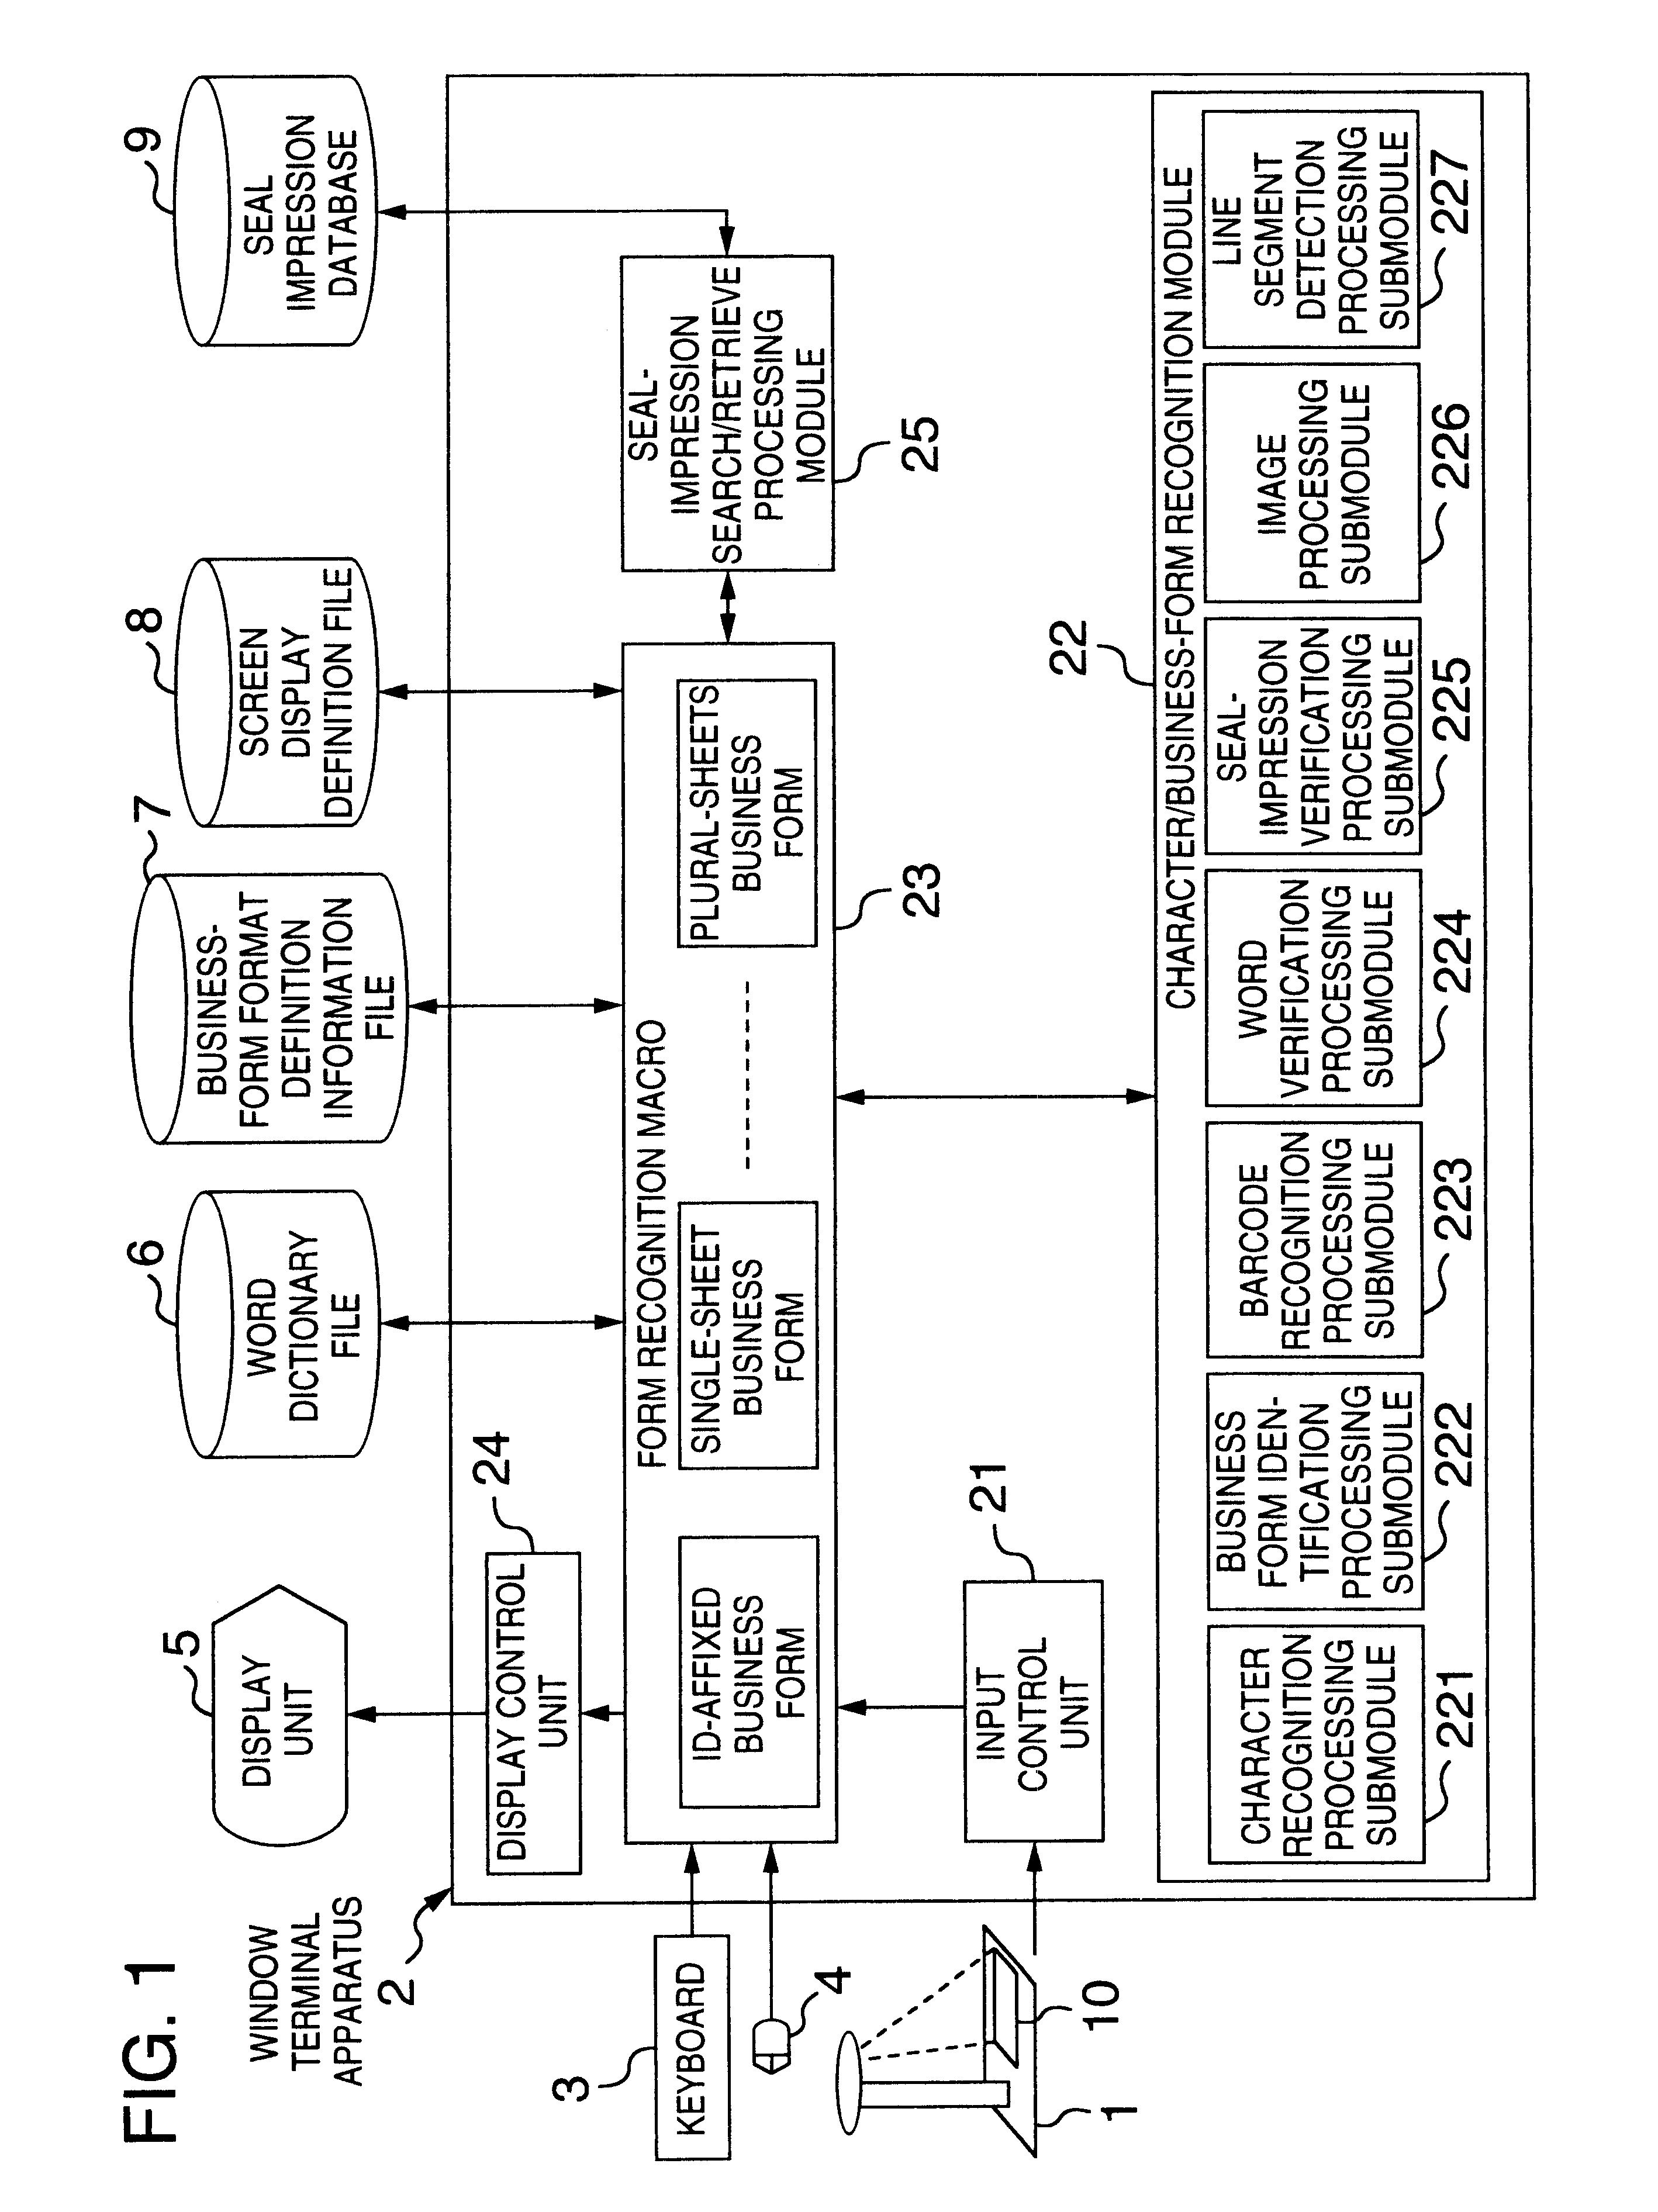 Business form handling method and system for carrying out the same